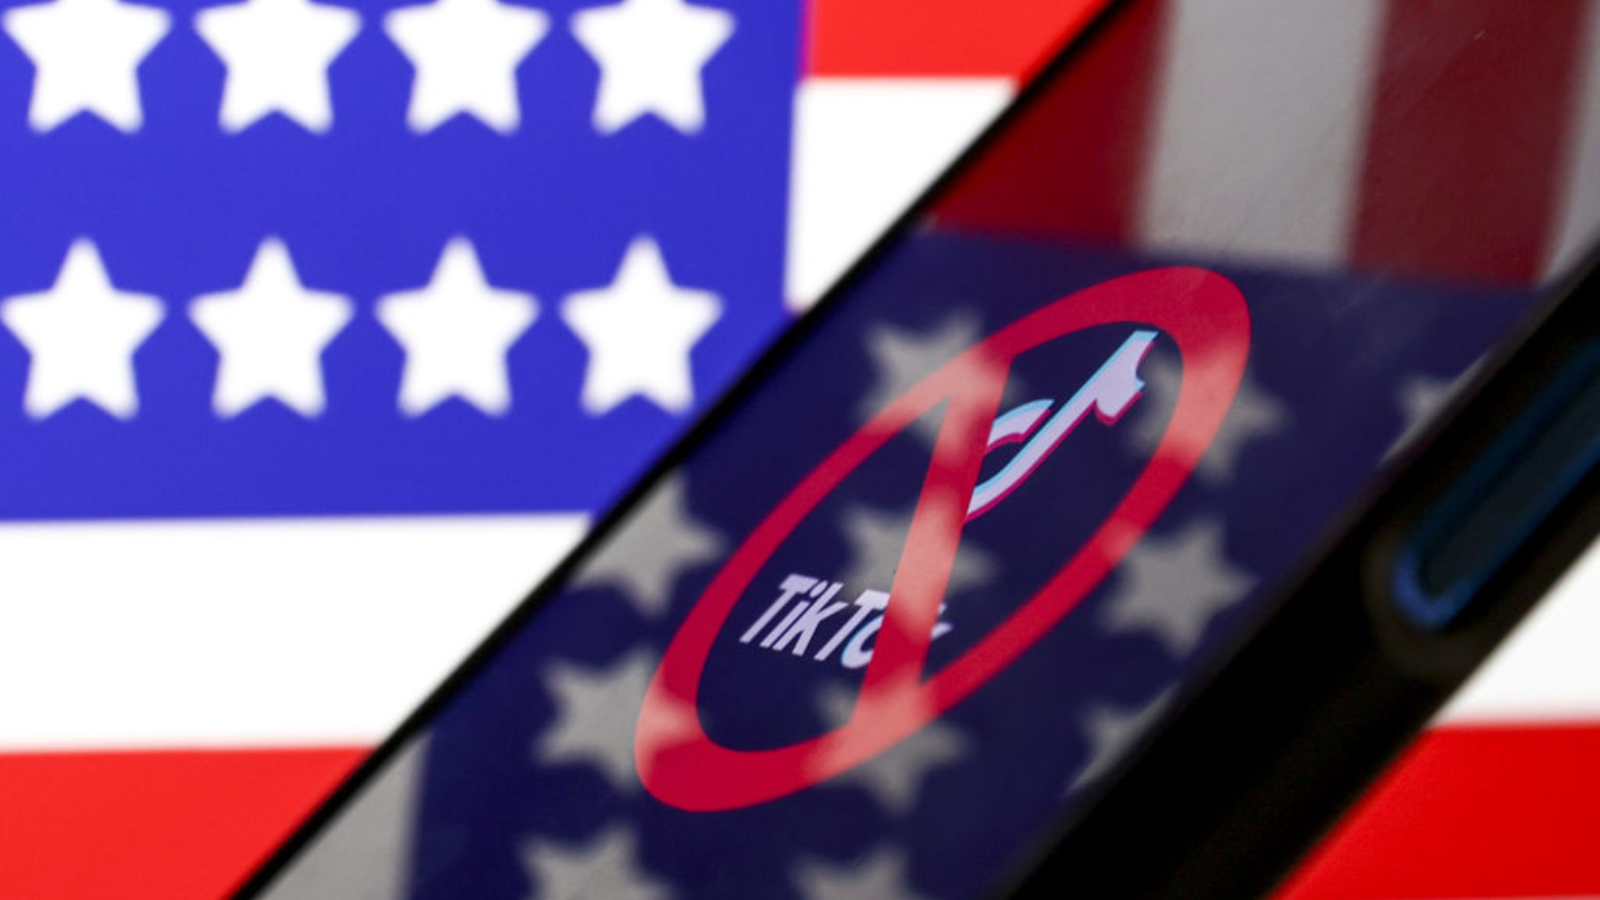 The TikTok logo with a cancellation symbol on top of it, displayed on a smartphone. It is in front of an American flag, which is also reflected on the smartphone screen.